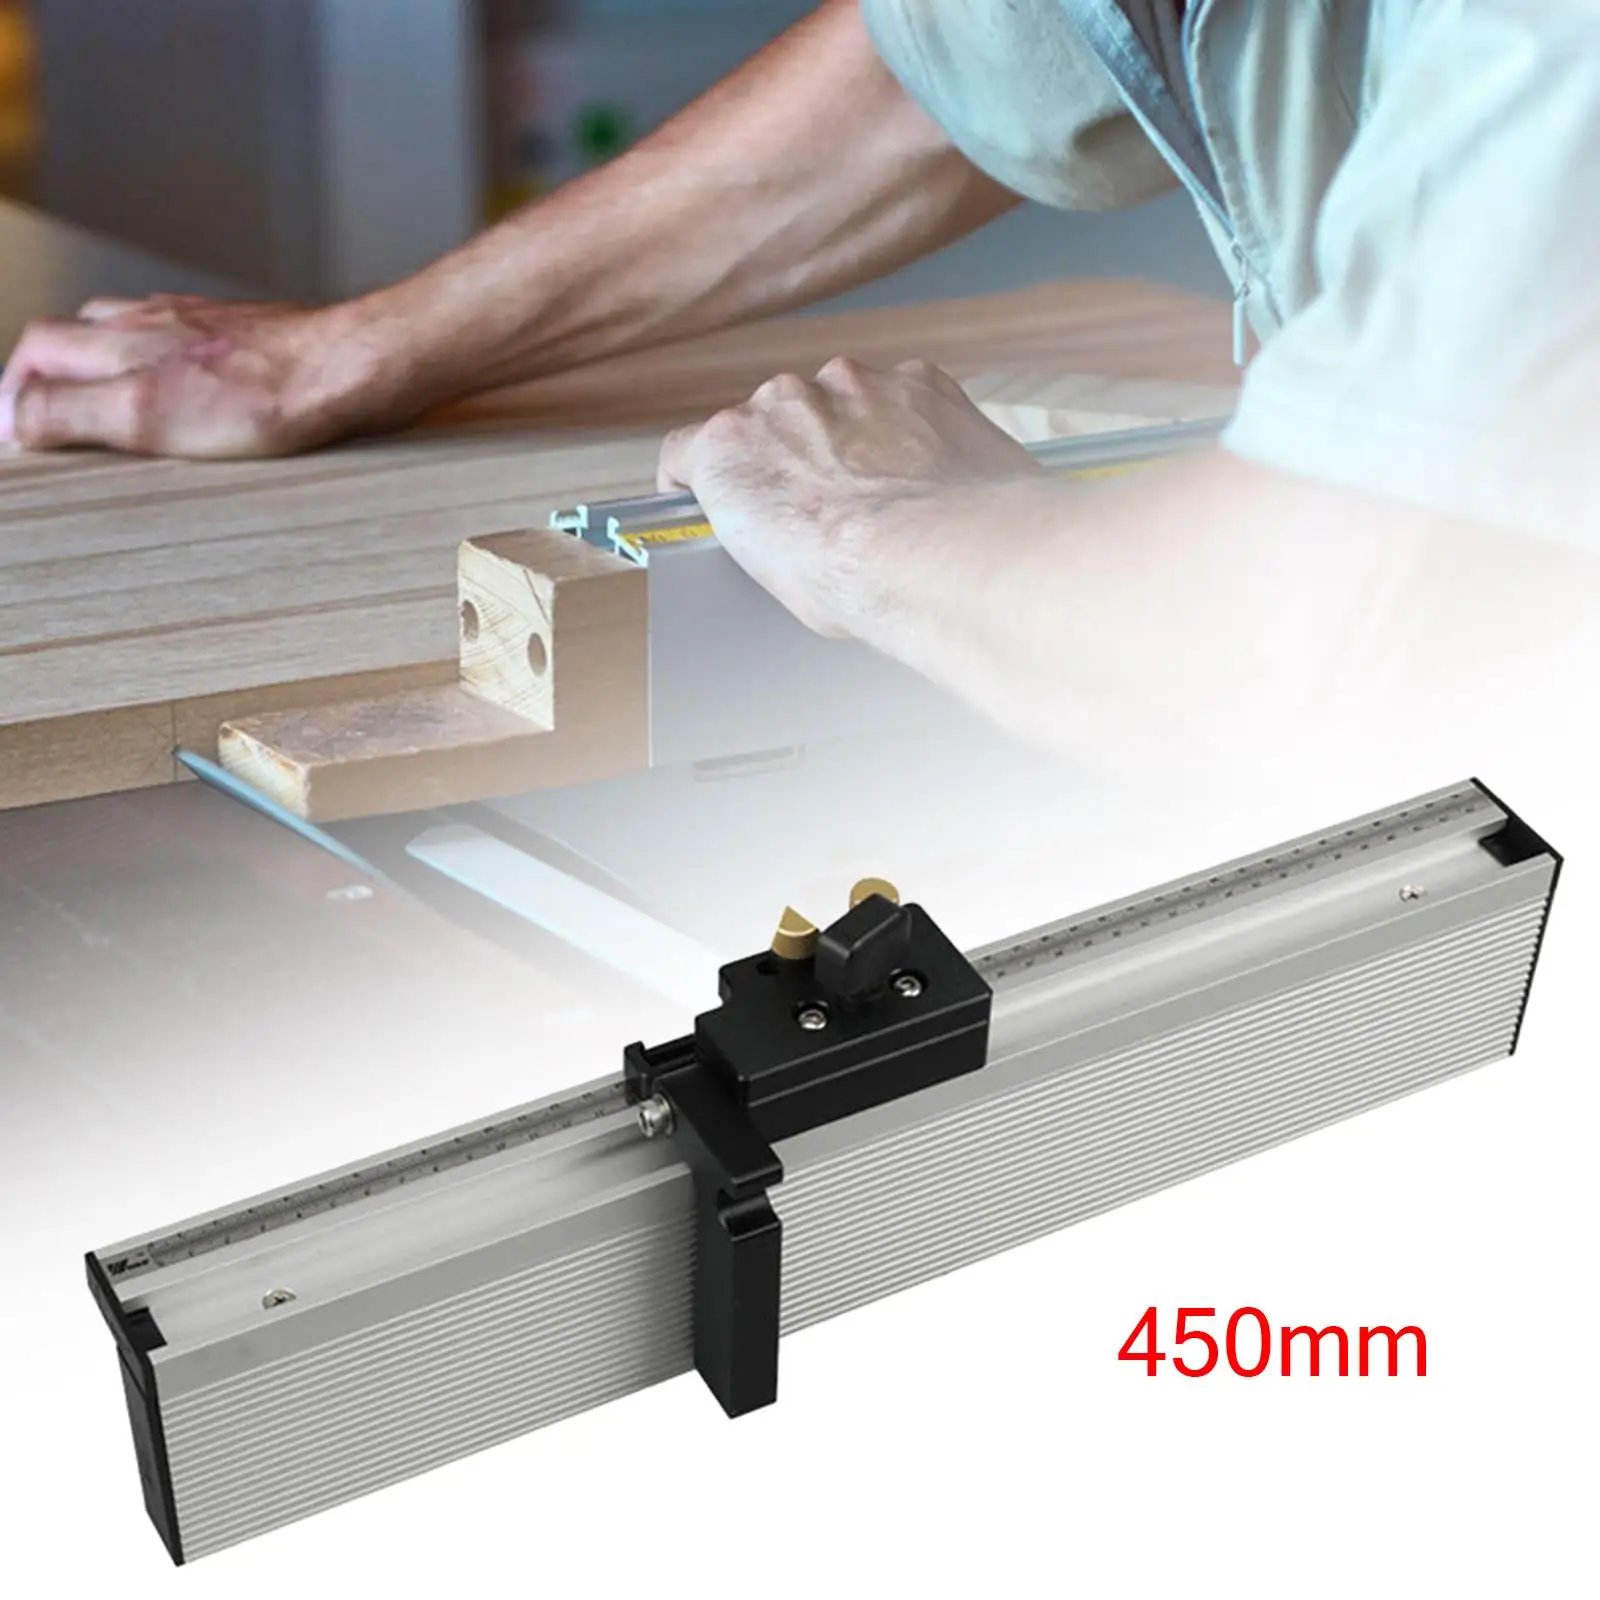 Aluminium Profile Fence Sliding Brackets Stop Table Accessories with Movable/Fixed  Miter Gauge Aluminum T Tracks Slot